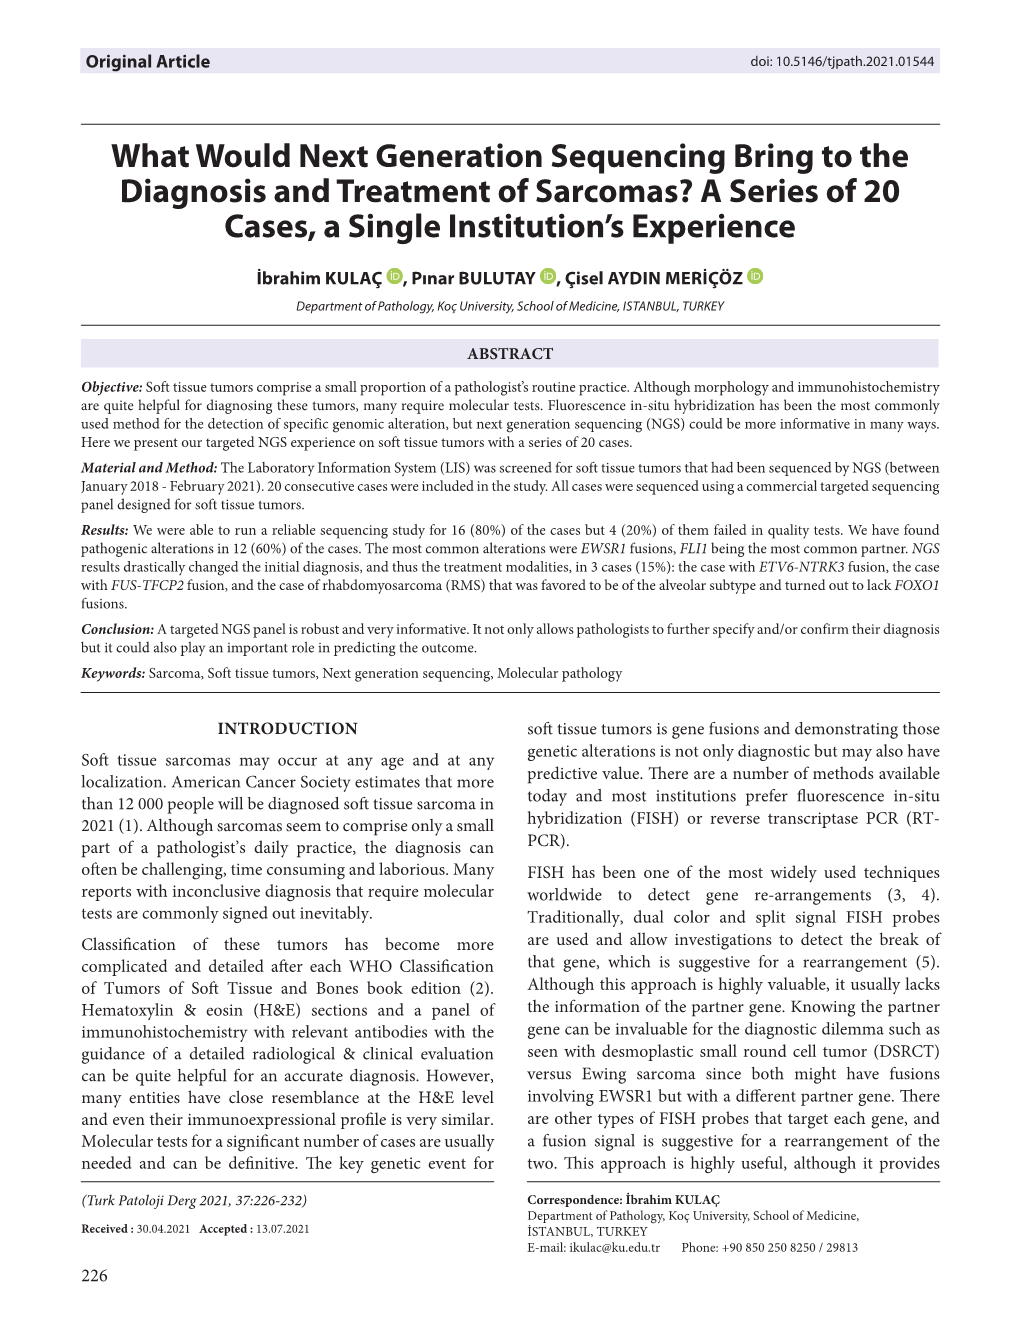 What Would Next Generation Sequencing Bring to the Diagnosis and Treatment of Sarcomas? a Series of 20 Cases, a Single Institution’S Experience